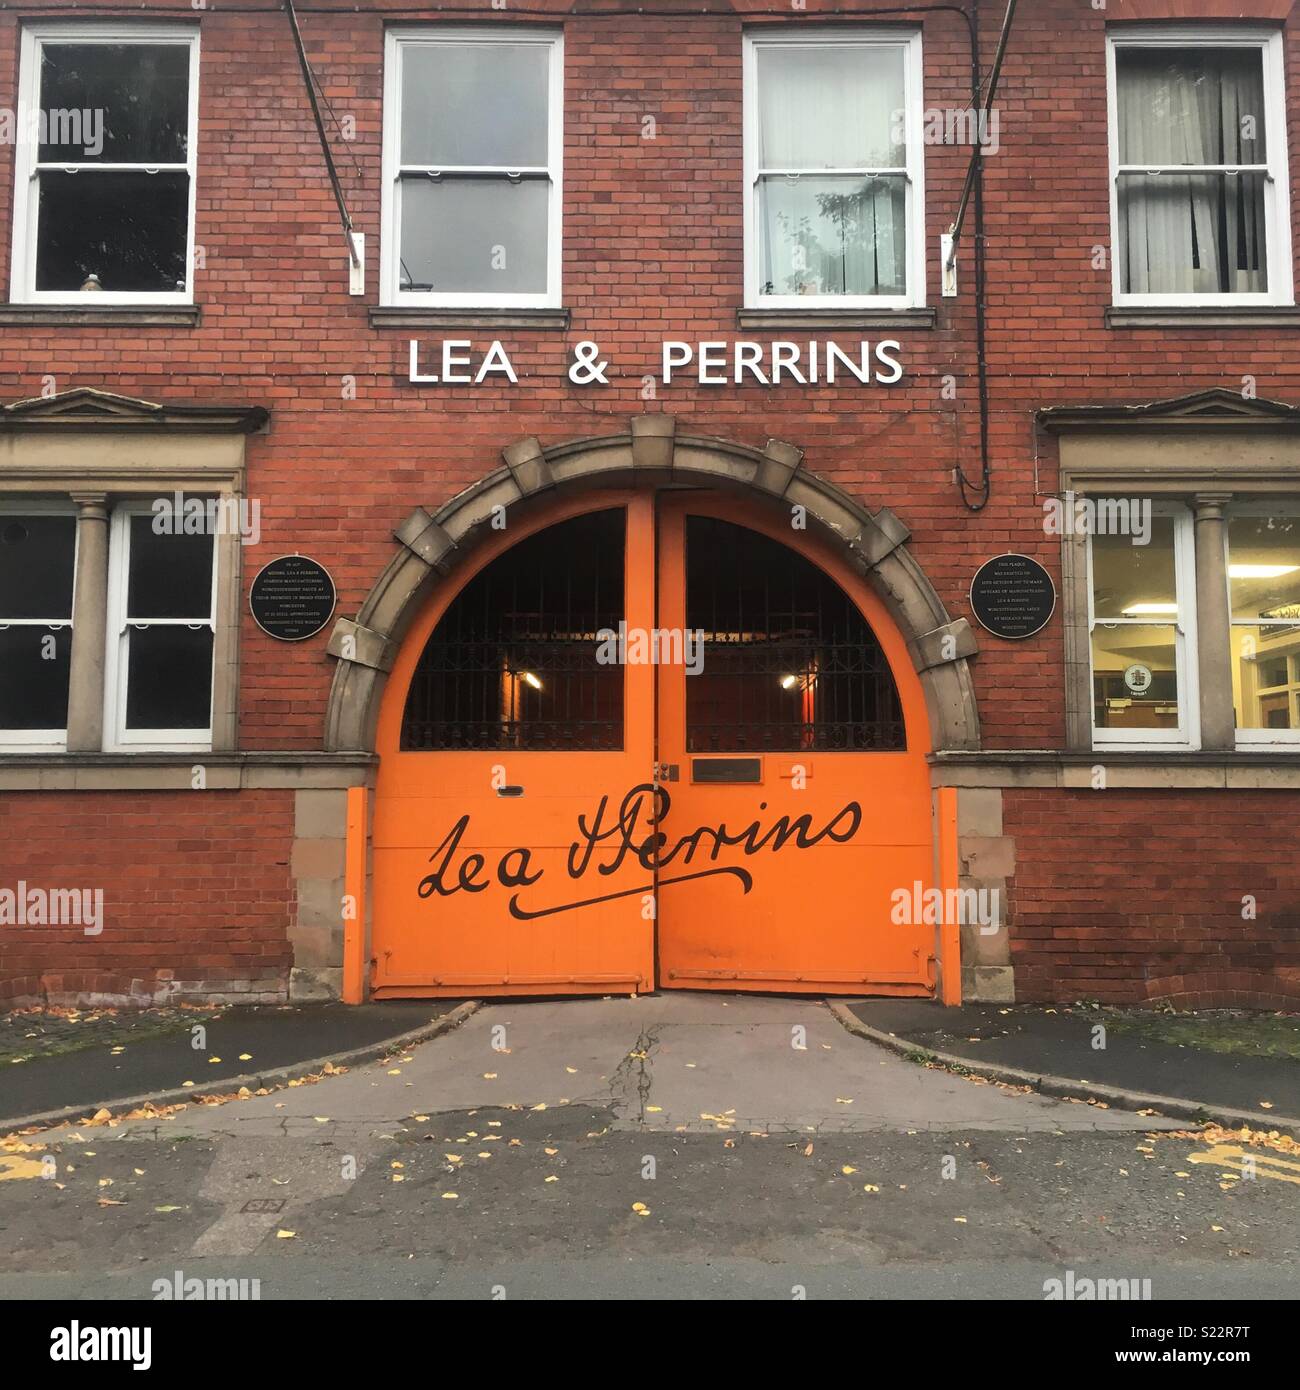 Lea & Perrins Worcestershire Sauce Factory Stock Photo